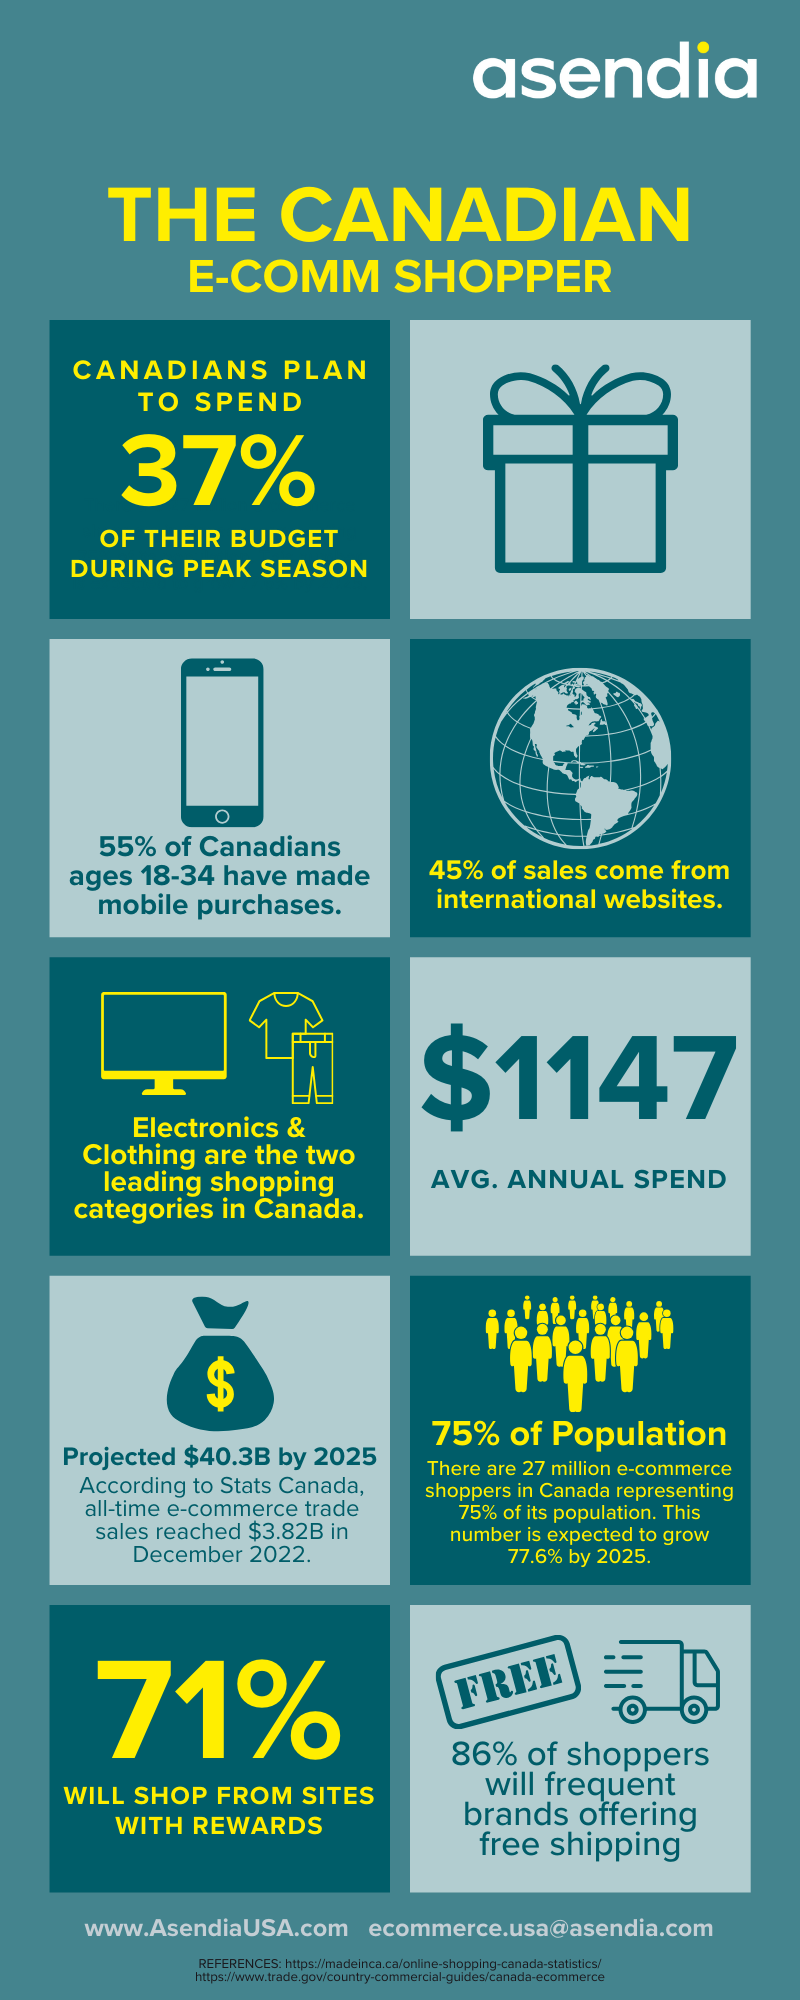 The Canadian E-commerce Shopper (infographic)